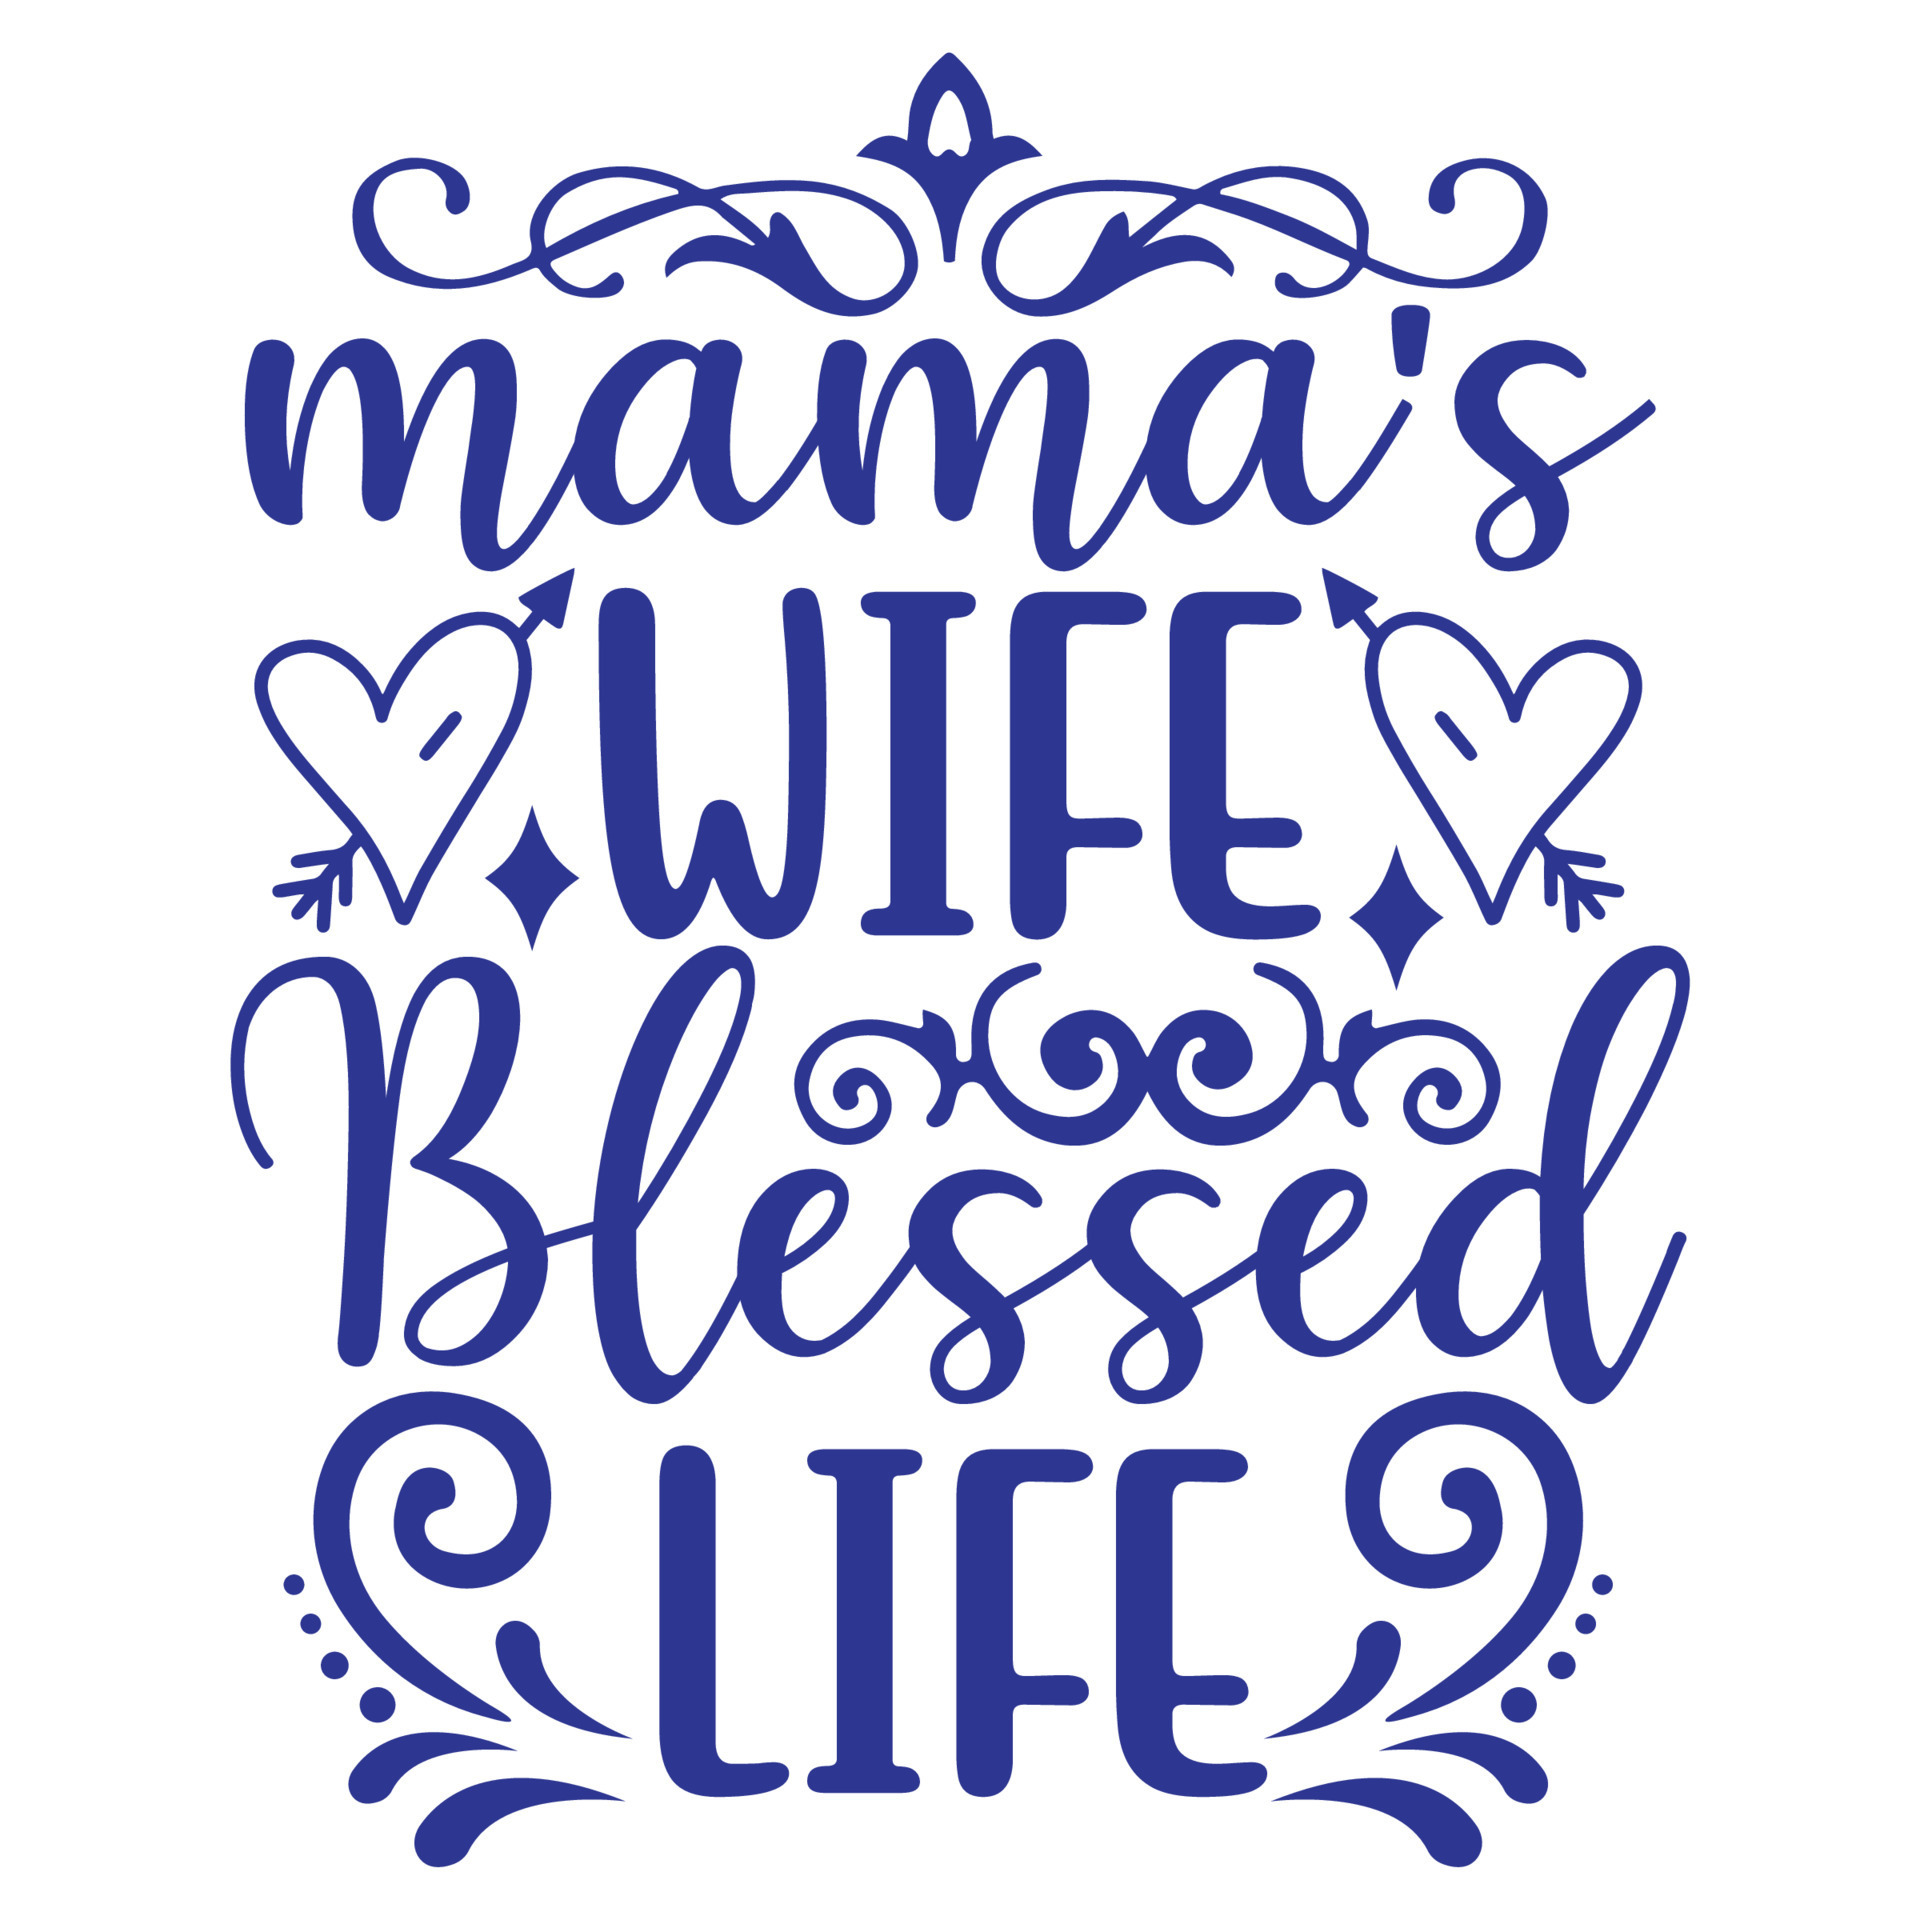 Blessed Tank, Flowy Tank, Inspirational, Blessing, Christian Clothing,  Blessed Mama, Blessing, Mama Mom Momma Mother Gift, Women's S-2XL 